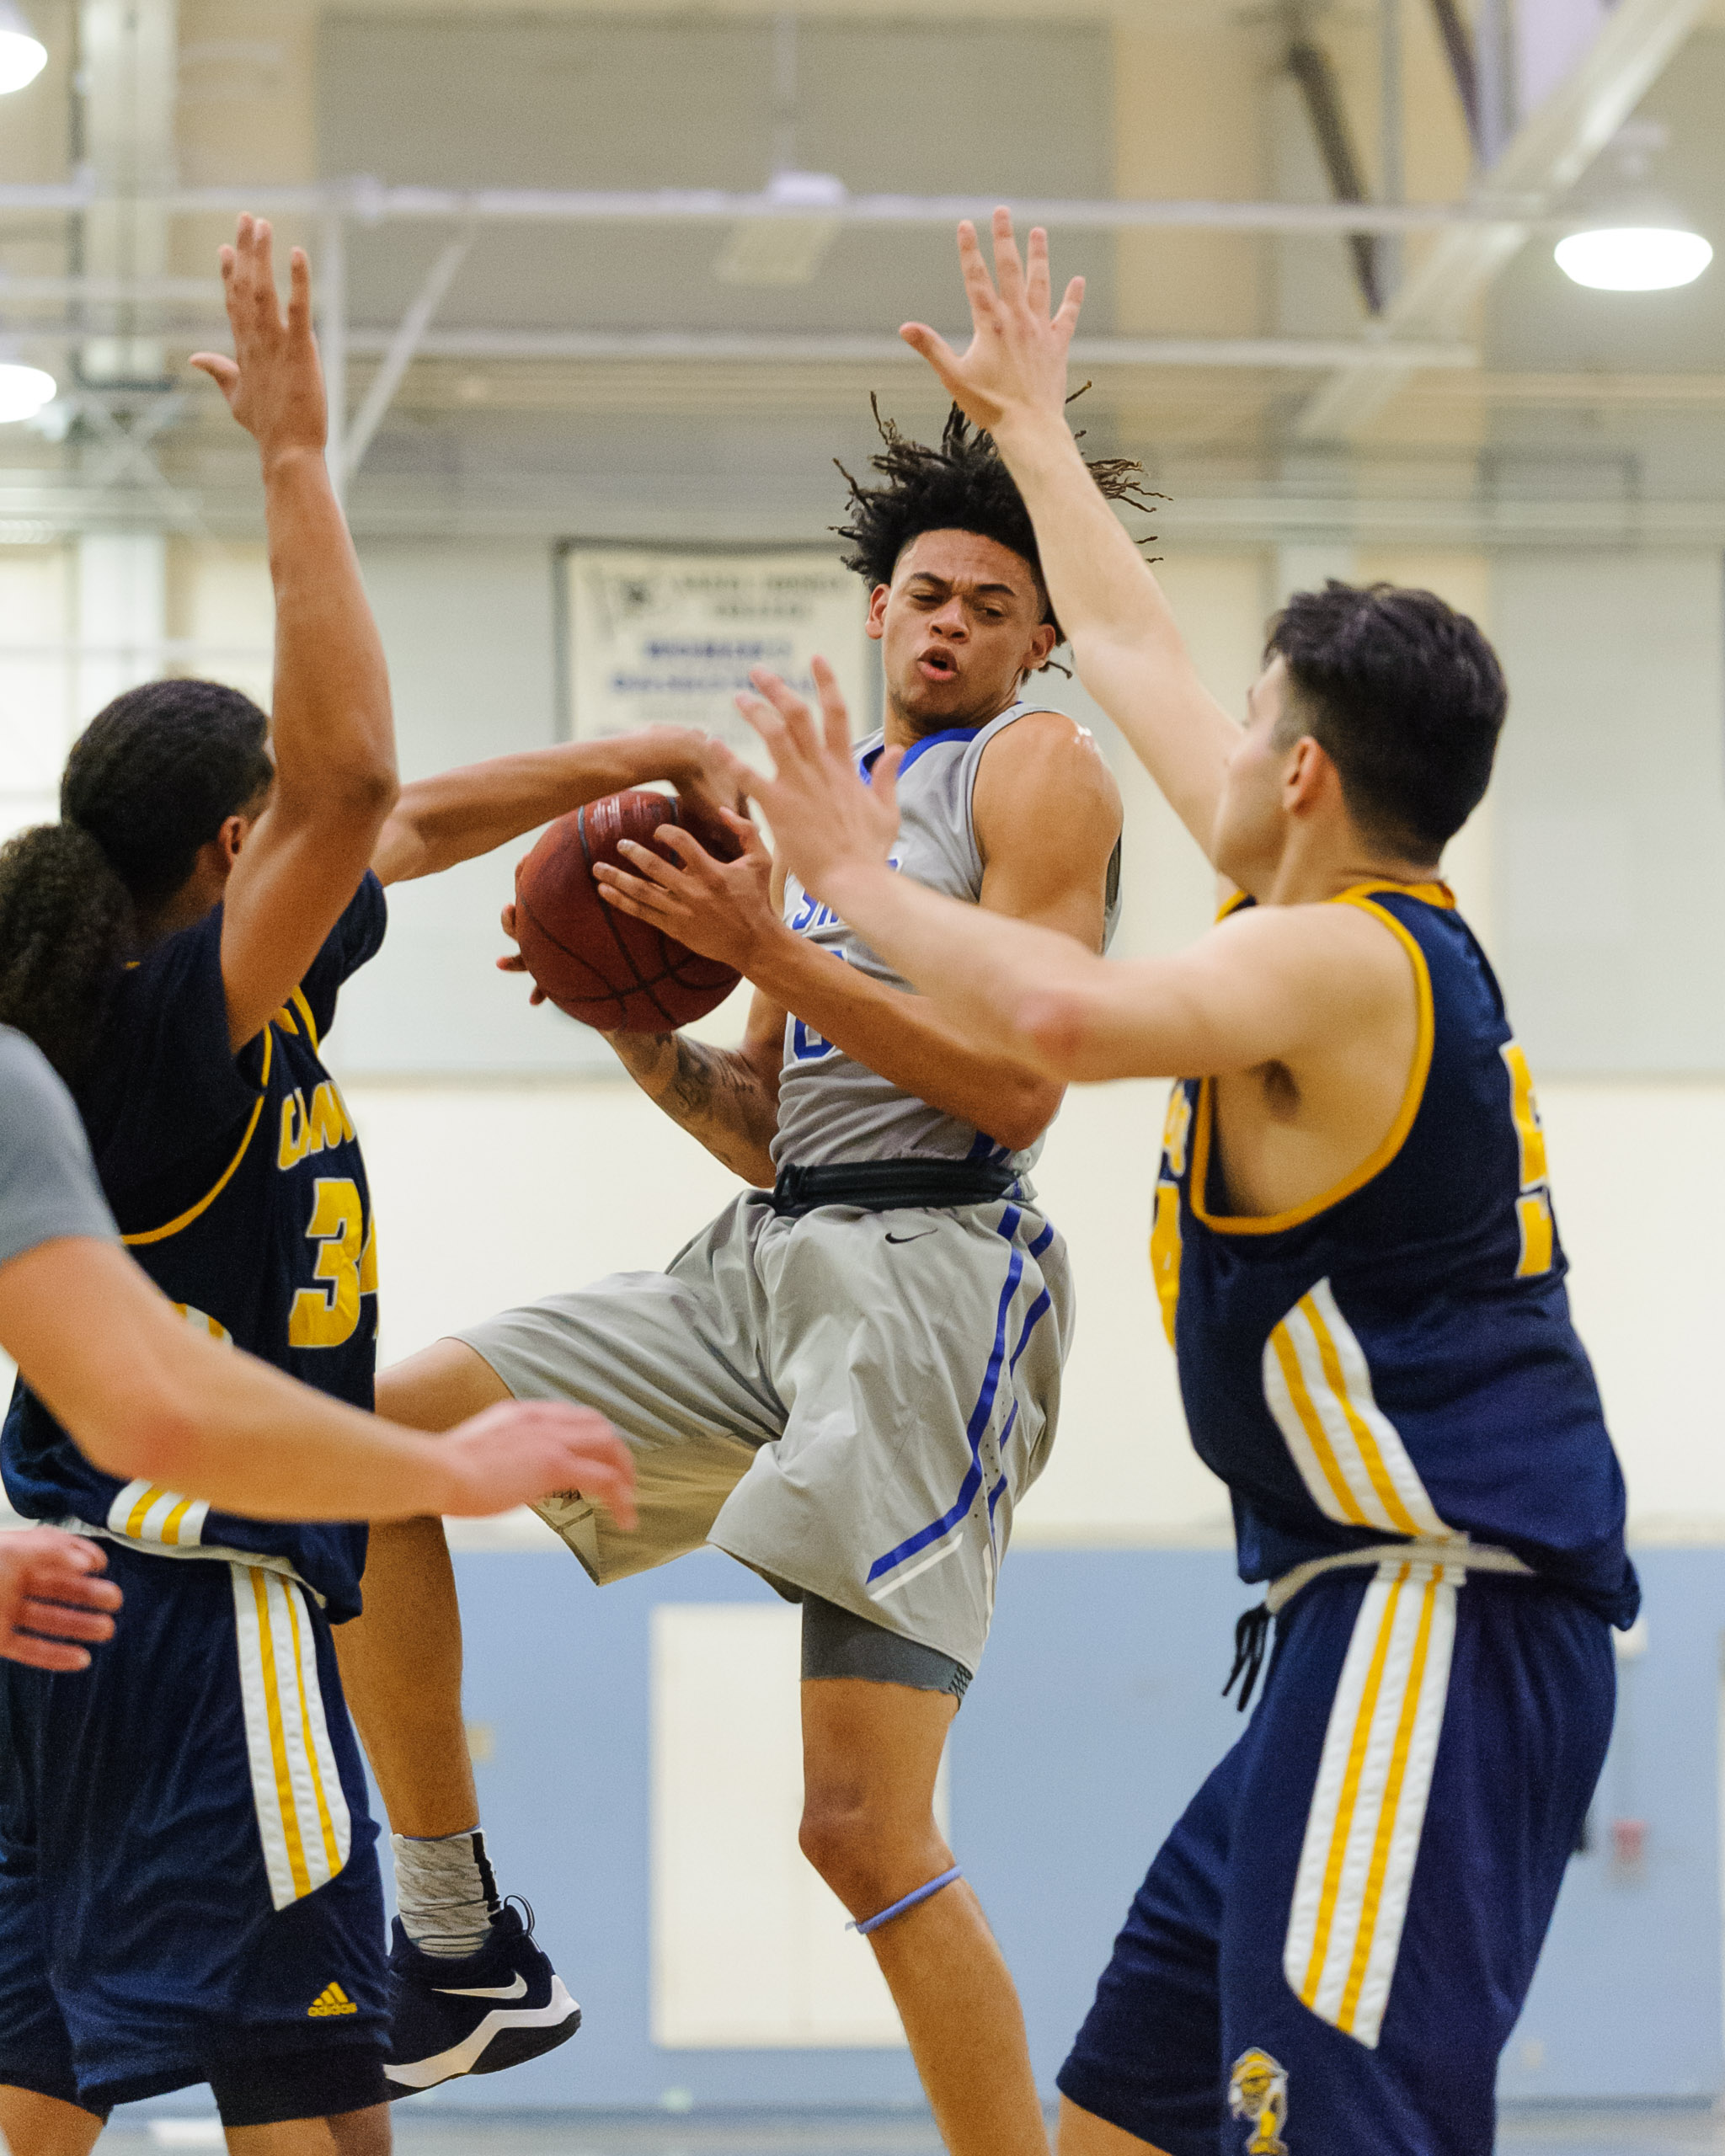  Forward Michael Fry (0) of Santa Monica College grabs an offensive rebound in traffic. The Santa Monica College Corsairs lose the game 74-72 to the College of the Canyons Cougars. The game was held at the SMC Pavilion at the Santa Monica College Mai